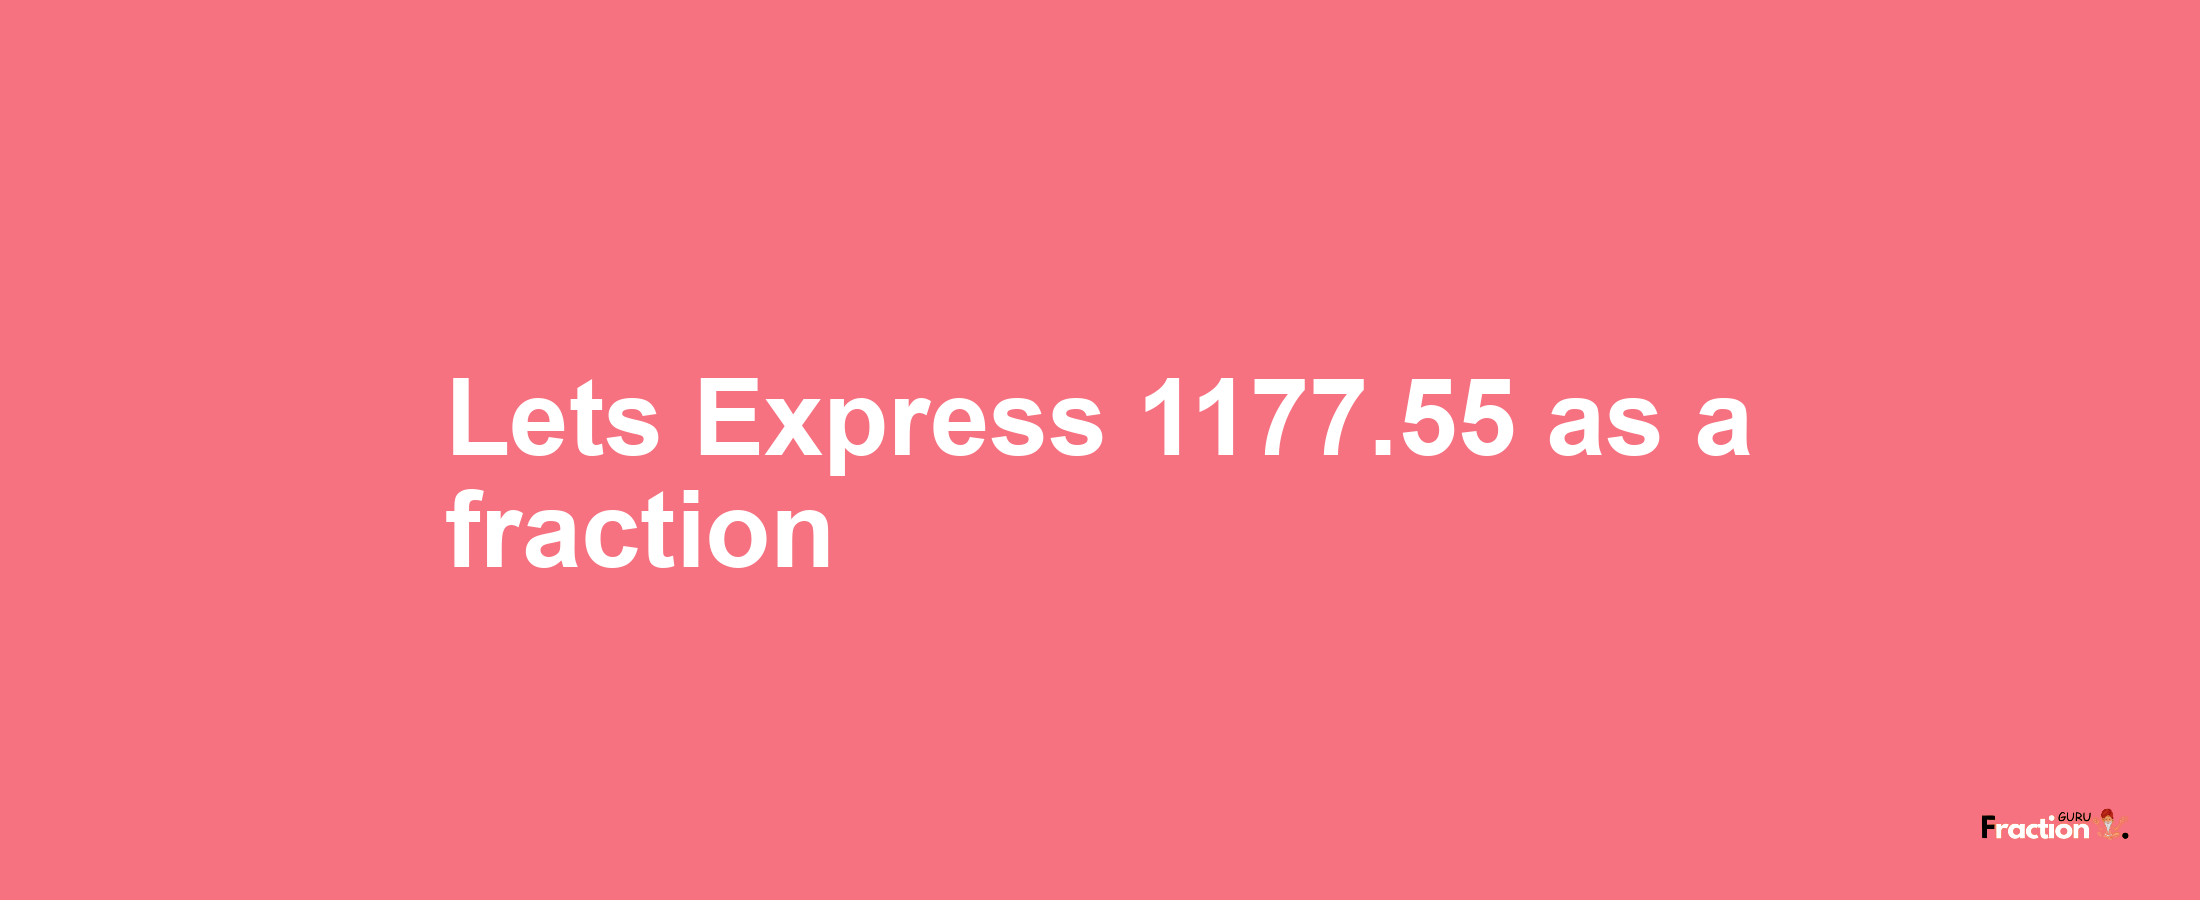 Lets Express 1177.55 as afraction